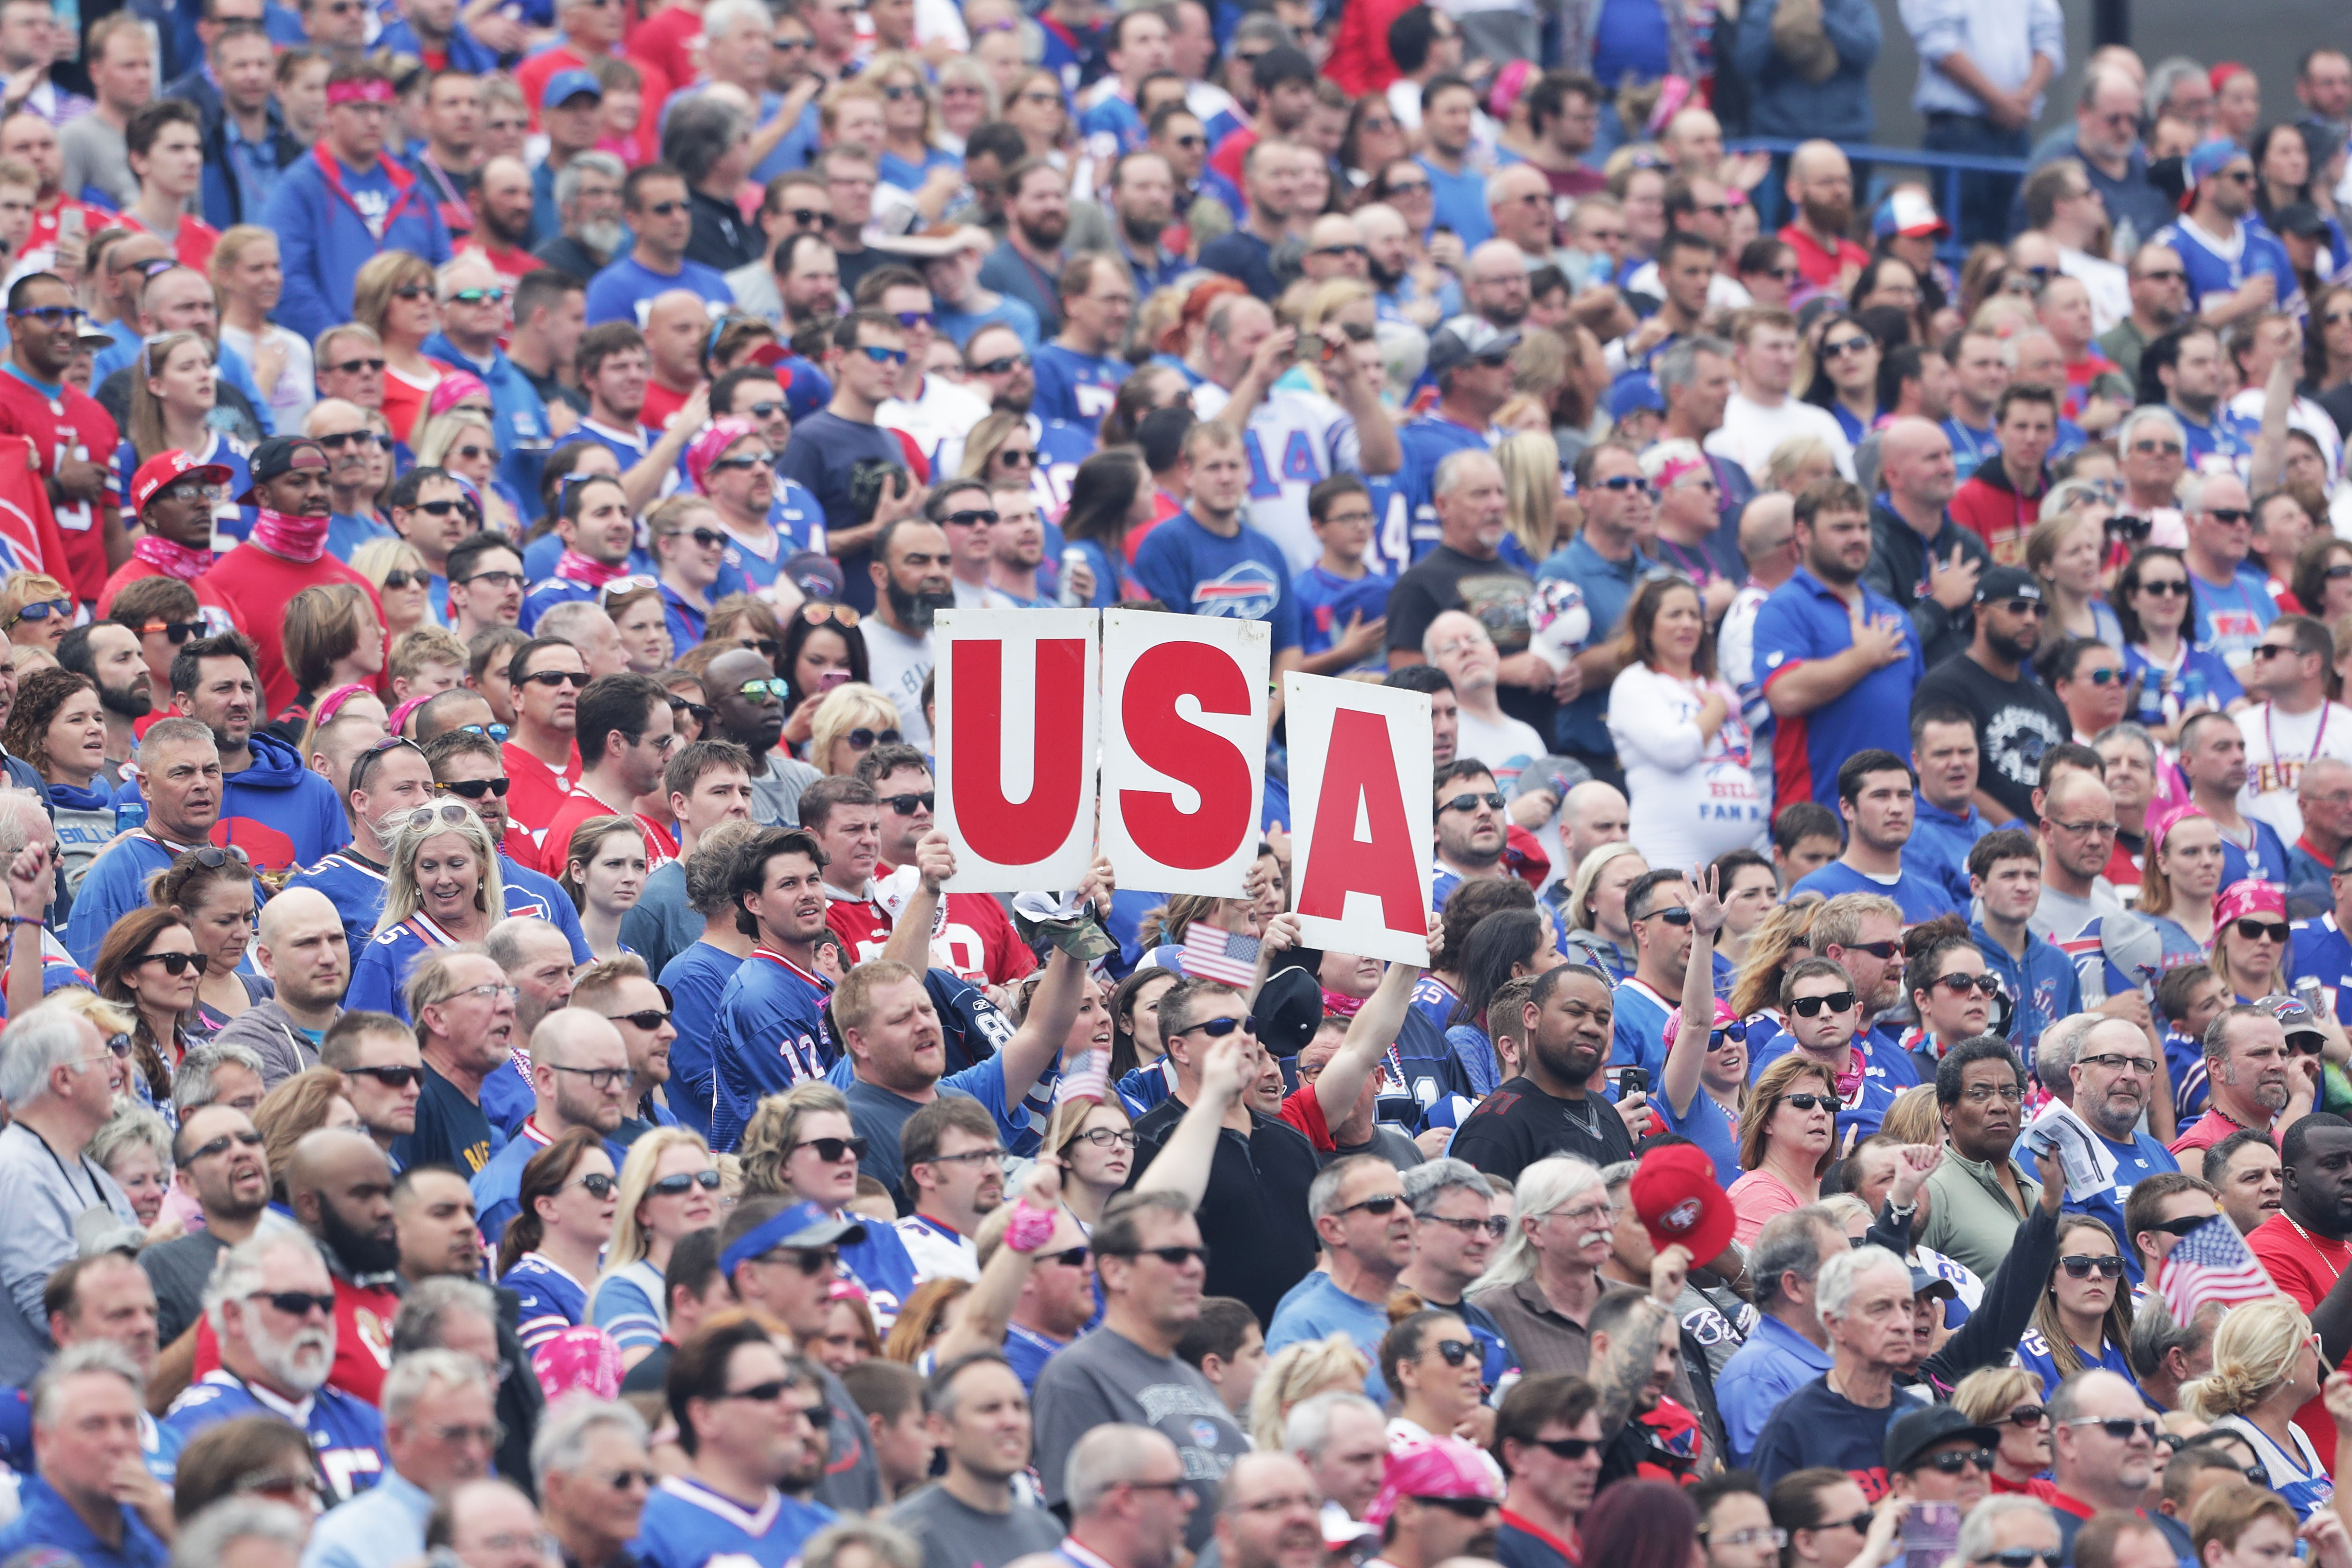 Fans hold up a "USA" sign during the national anthem before the game between the San Francisco 49ers and Buffalo Bills on October 16, 2016 in Buffalo, New York. (Photo by Brett Carlsen/Getty Images)